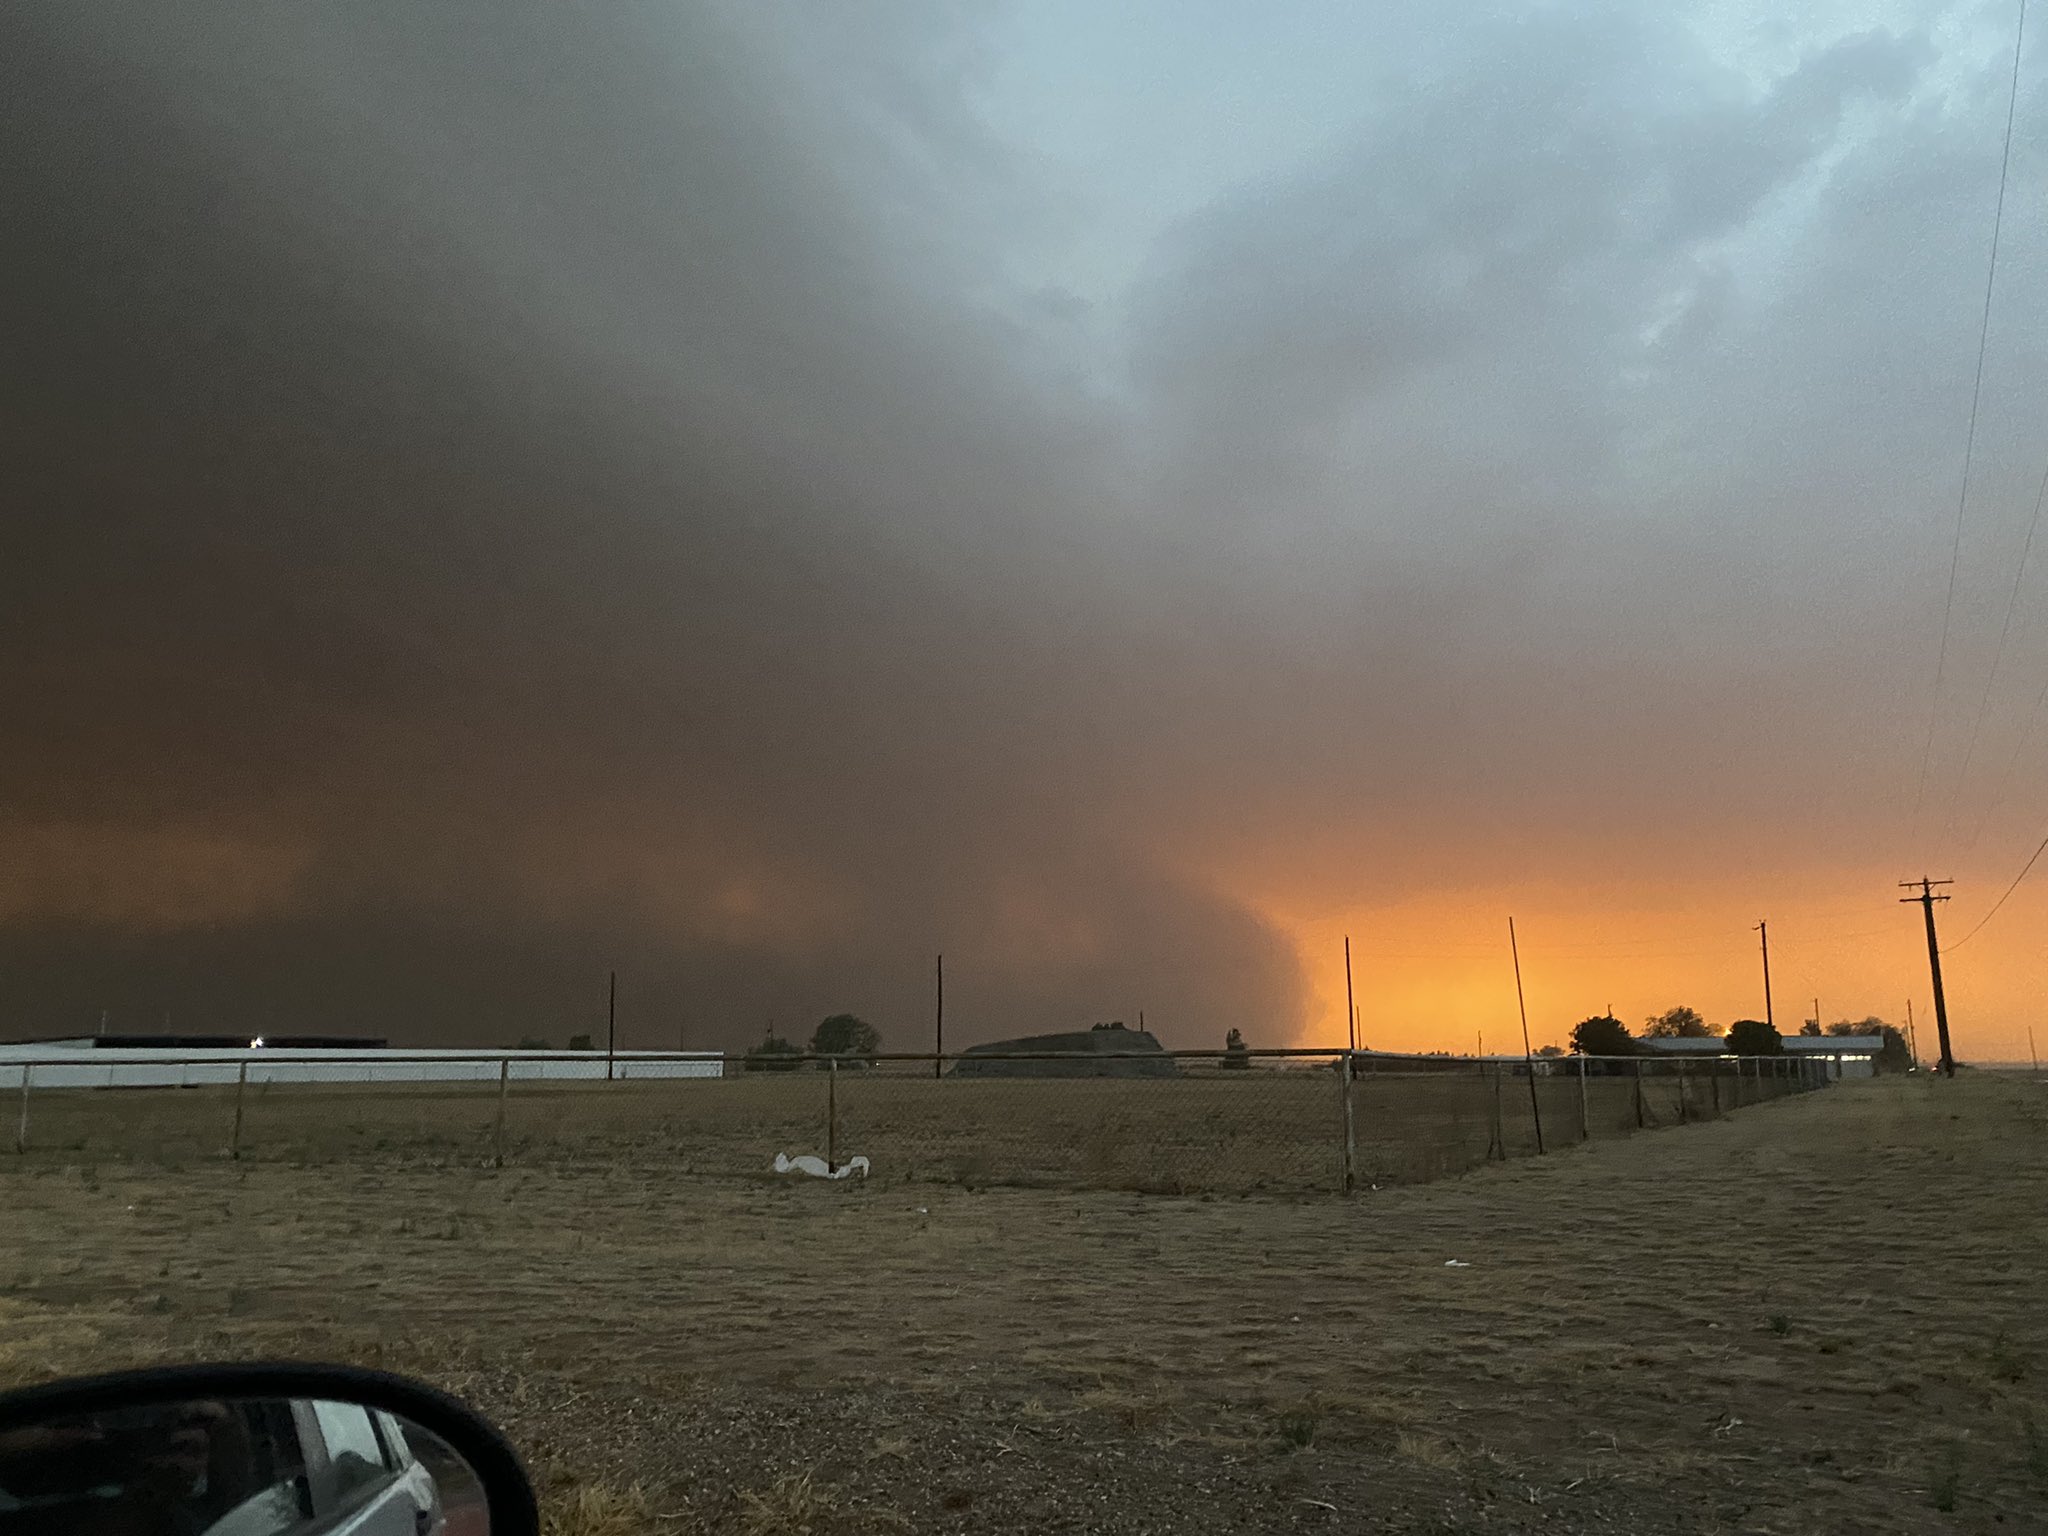 A wall of dust (haboob) near Smyer Tuesday evening (10 May 2022). The picture is courtesy of Jack Maney.